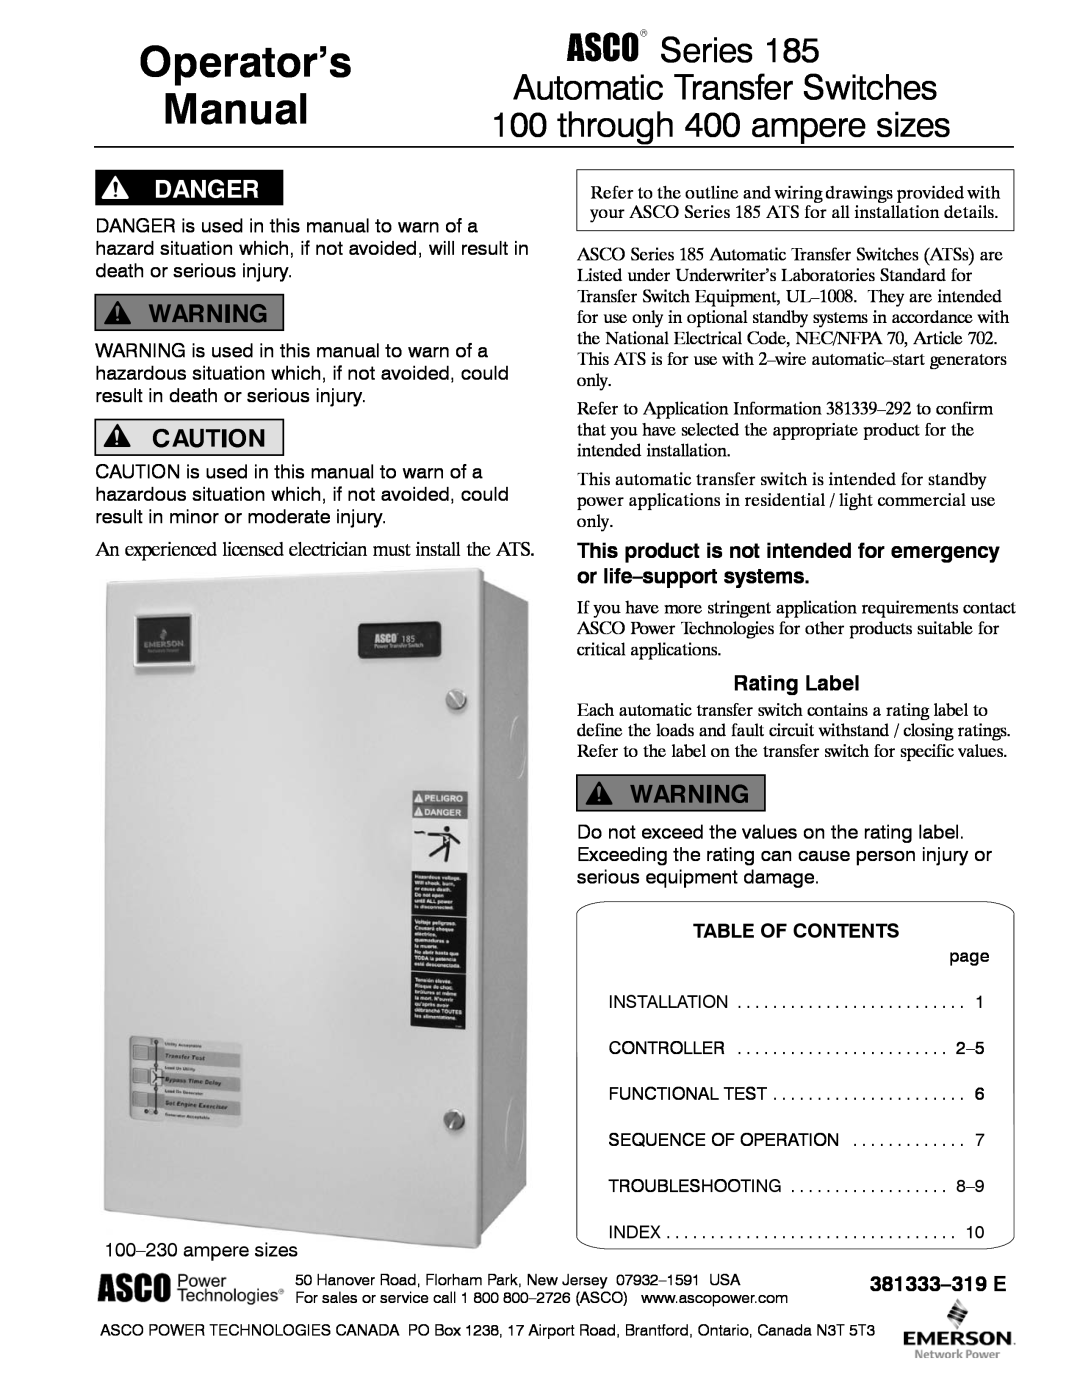 Emerson manual Rating Label, Operator’s Manual, through 400 ampere sizes, Series 185 Automatic Transfer Switches 